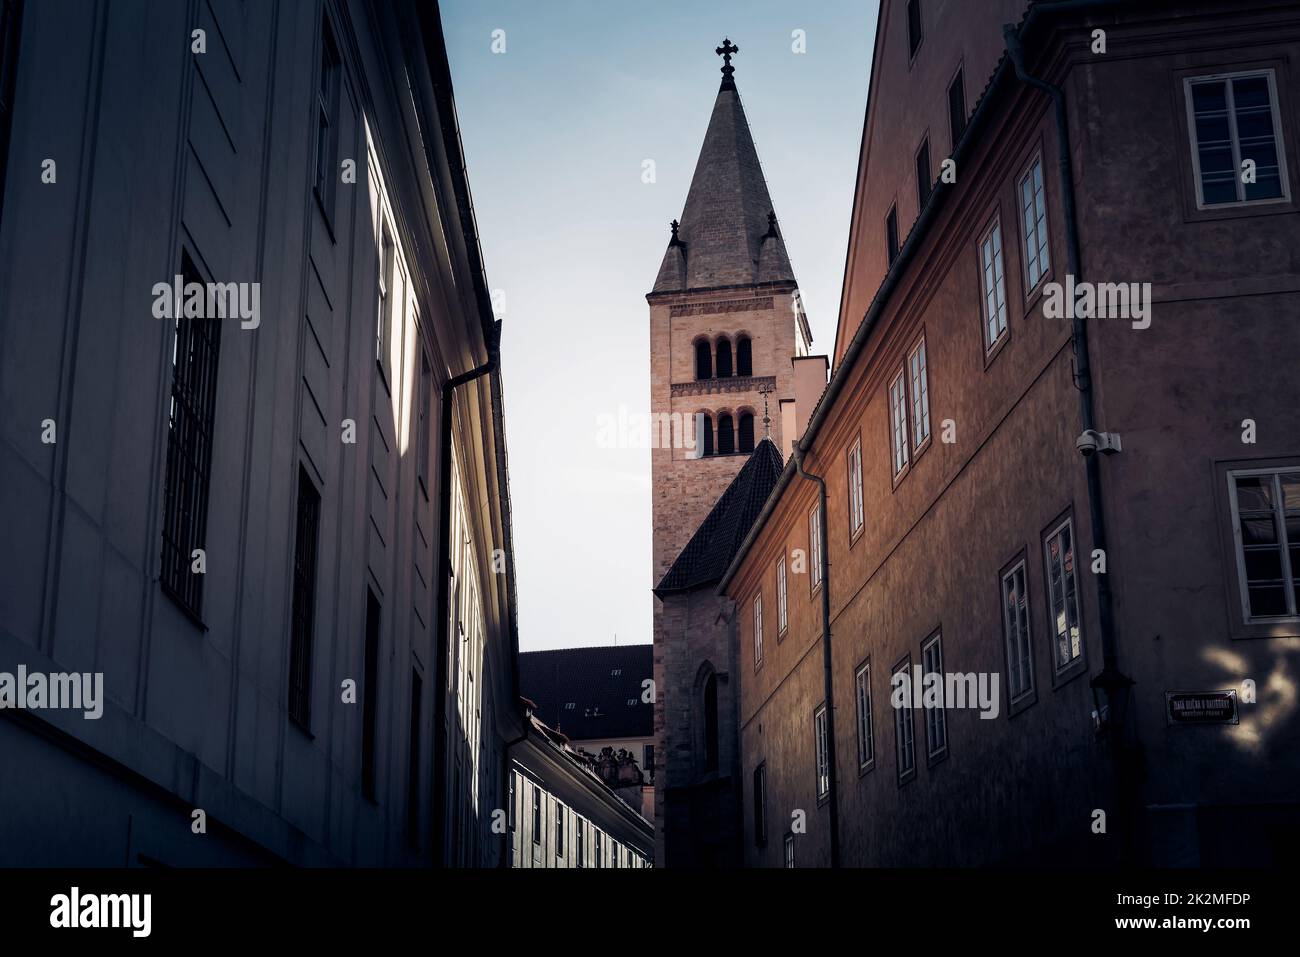 Narrow street in Prague castle with tower of St. Georges Basilica on background. Prague, Czech Republic Stock Photo